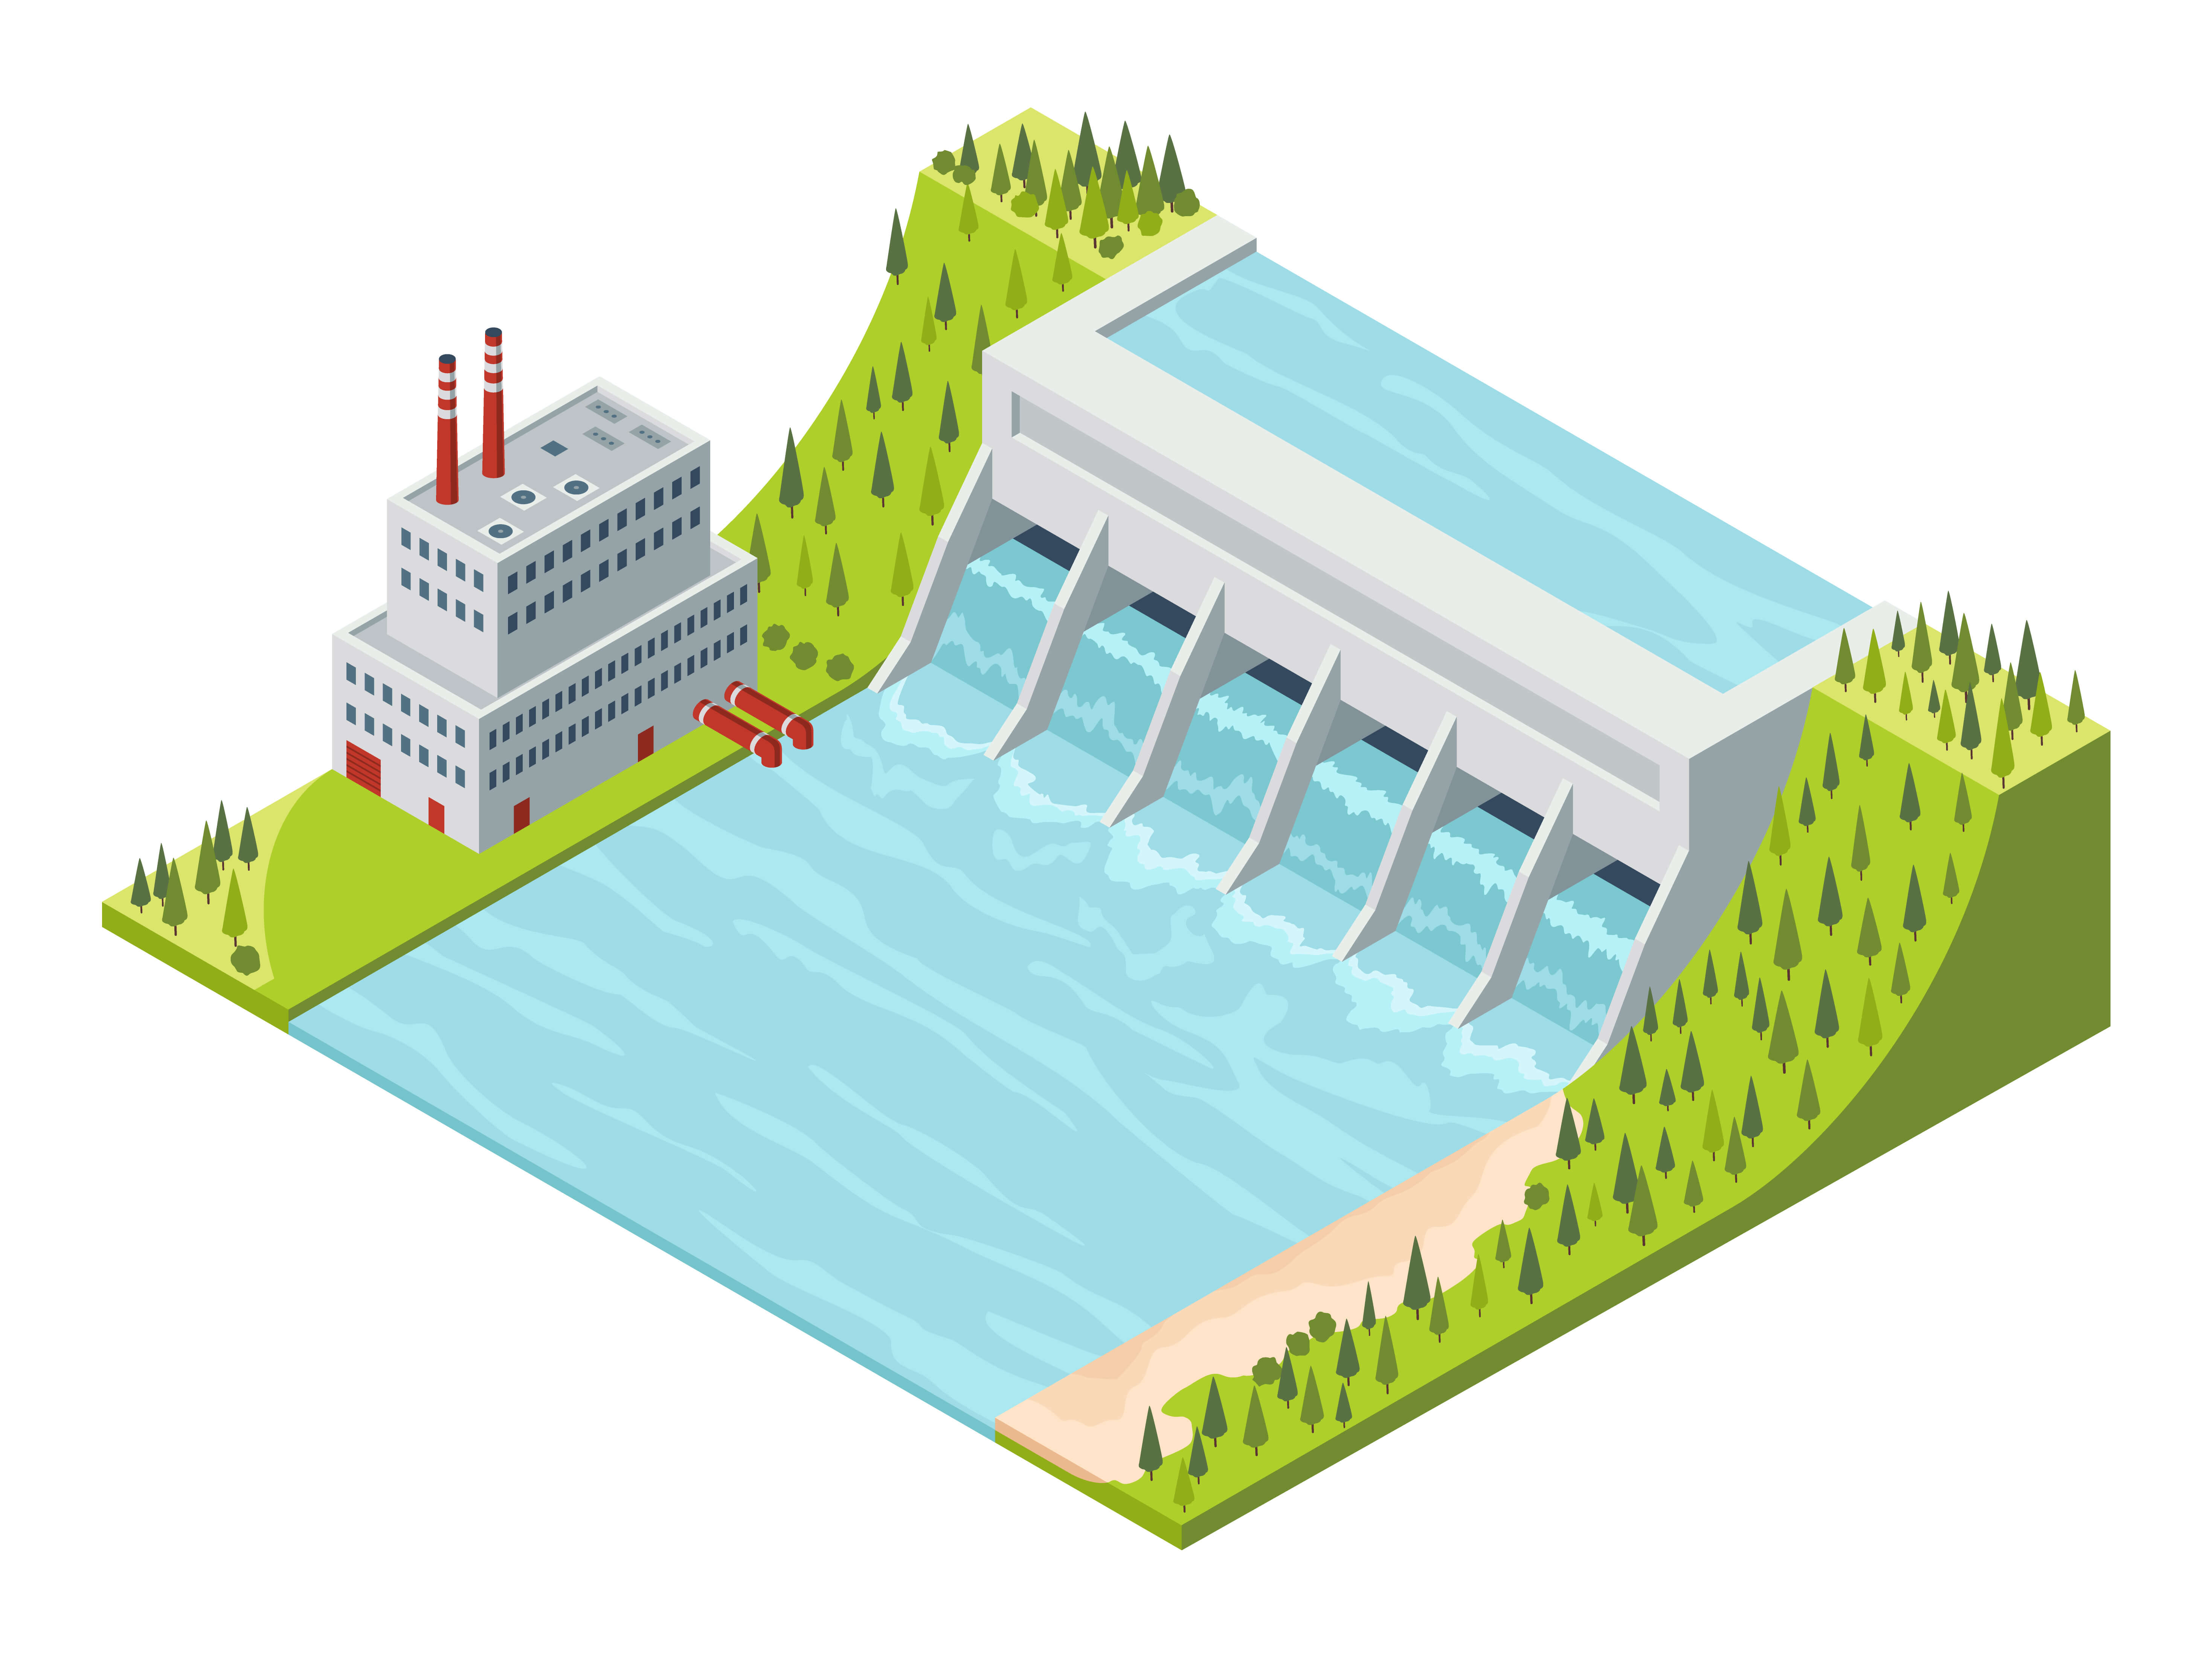 Disadvantages of Hydropower Plants